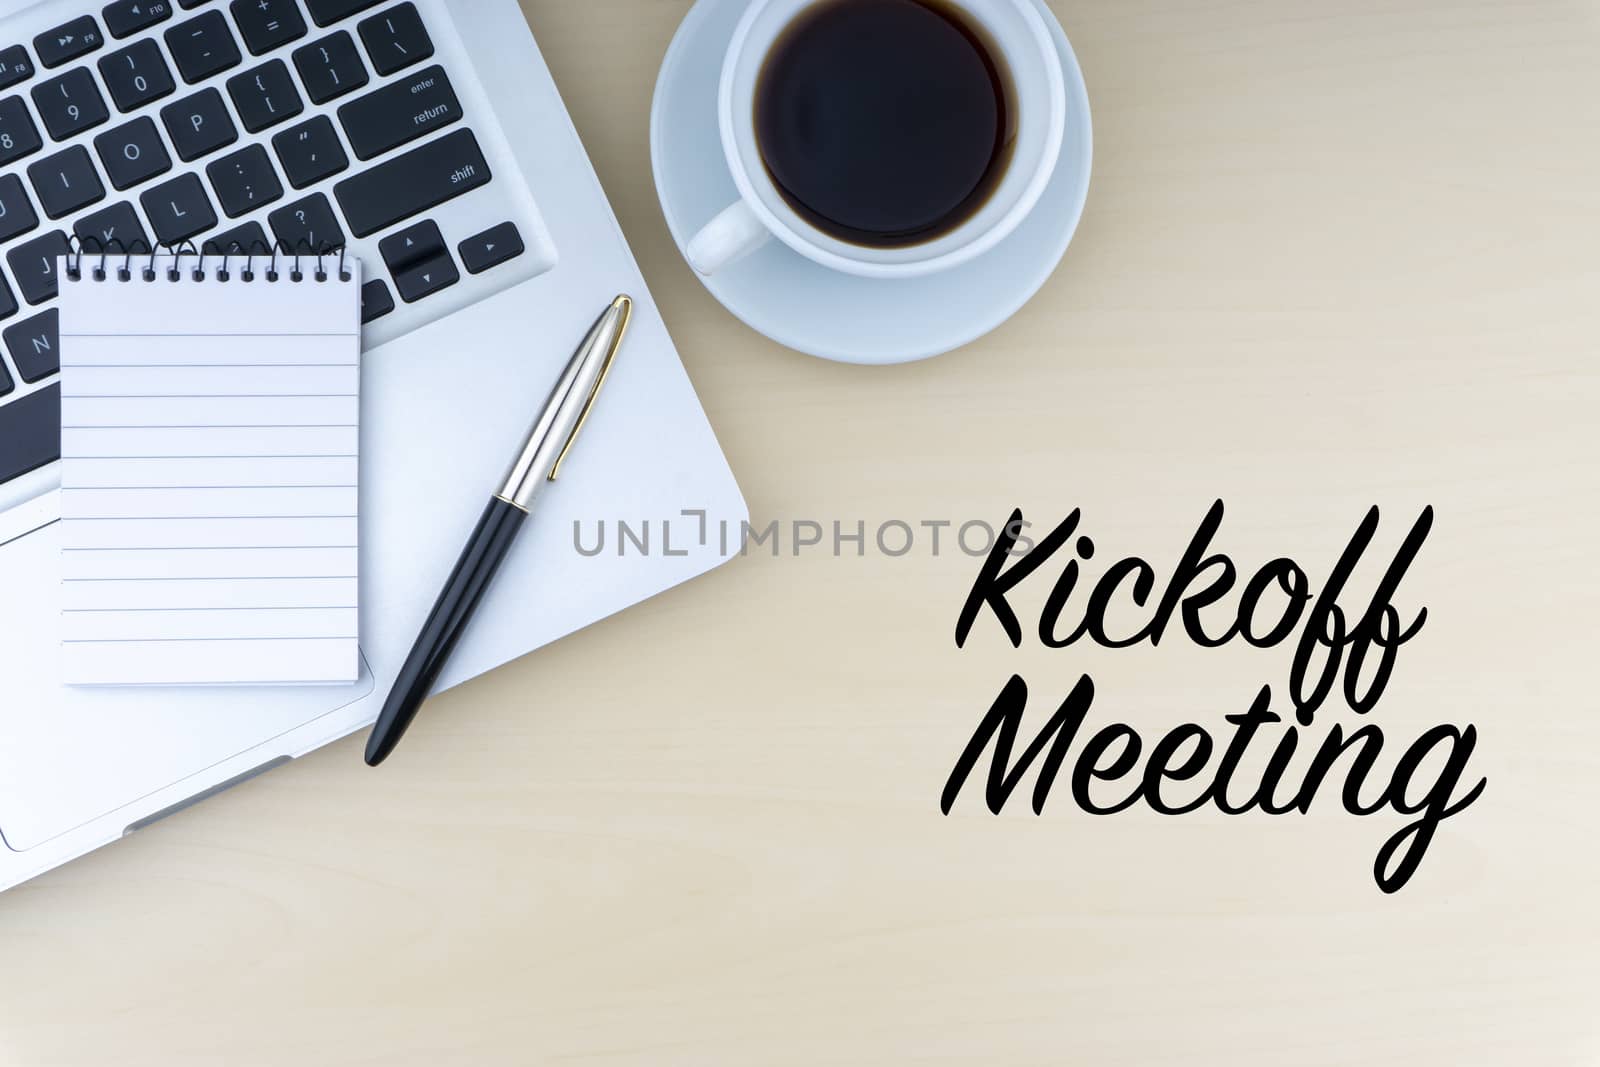 KICKOFF MEETING text with fountain pen, notepad, laptop and cup of coffee on wooden background by silverwings